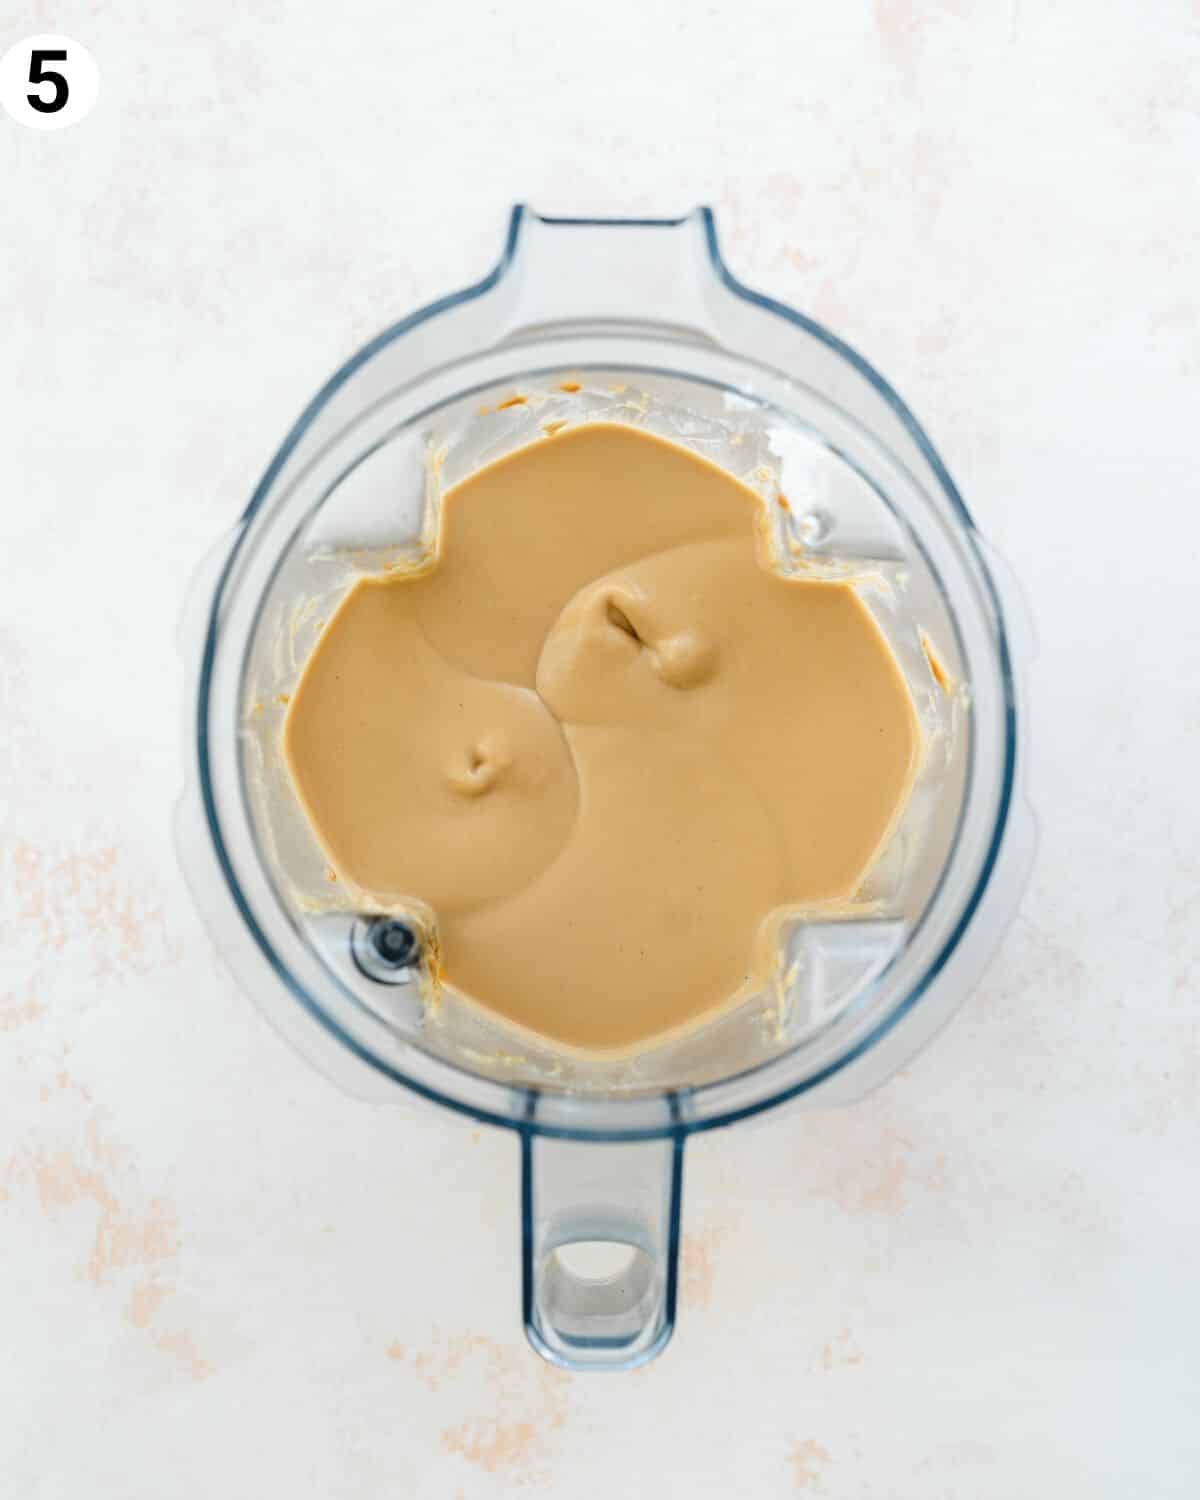 biscoff cheesecake filling blended in a vitamix.